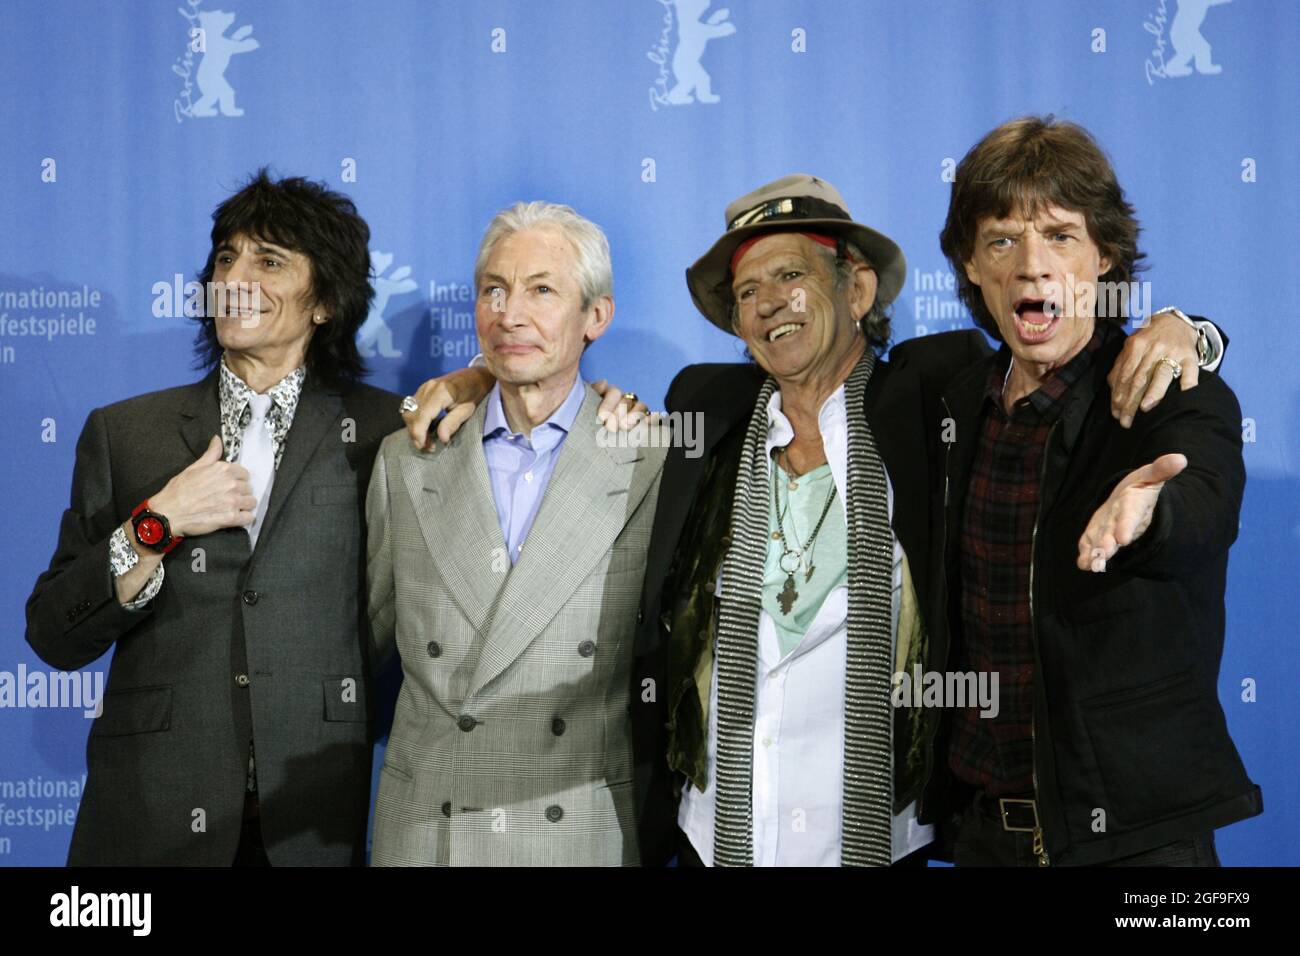 Berlin, Germany. 07th Feb, 2008. The Rolling Stones - Ron Wood (l-r), Charlie Watts, Keith Richards and Mick Jagger - stand at the photo shoot for the Berlinale opening film 'Shine a light'. Charlie Watts, the drummer of the legendary rock band Rolling Stones, is dead. Credit: Rainer Jensen/dpa/Alamy Live News Stock Photo